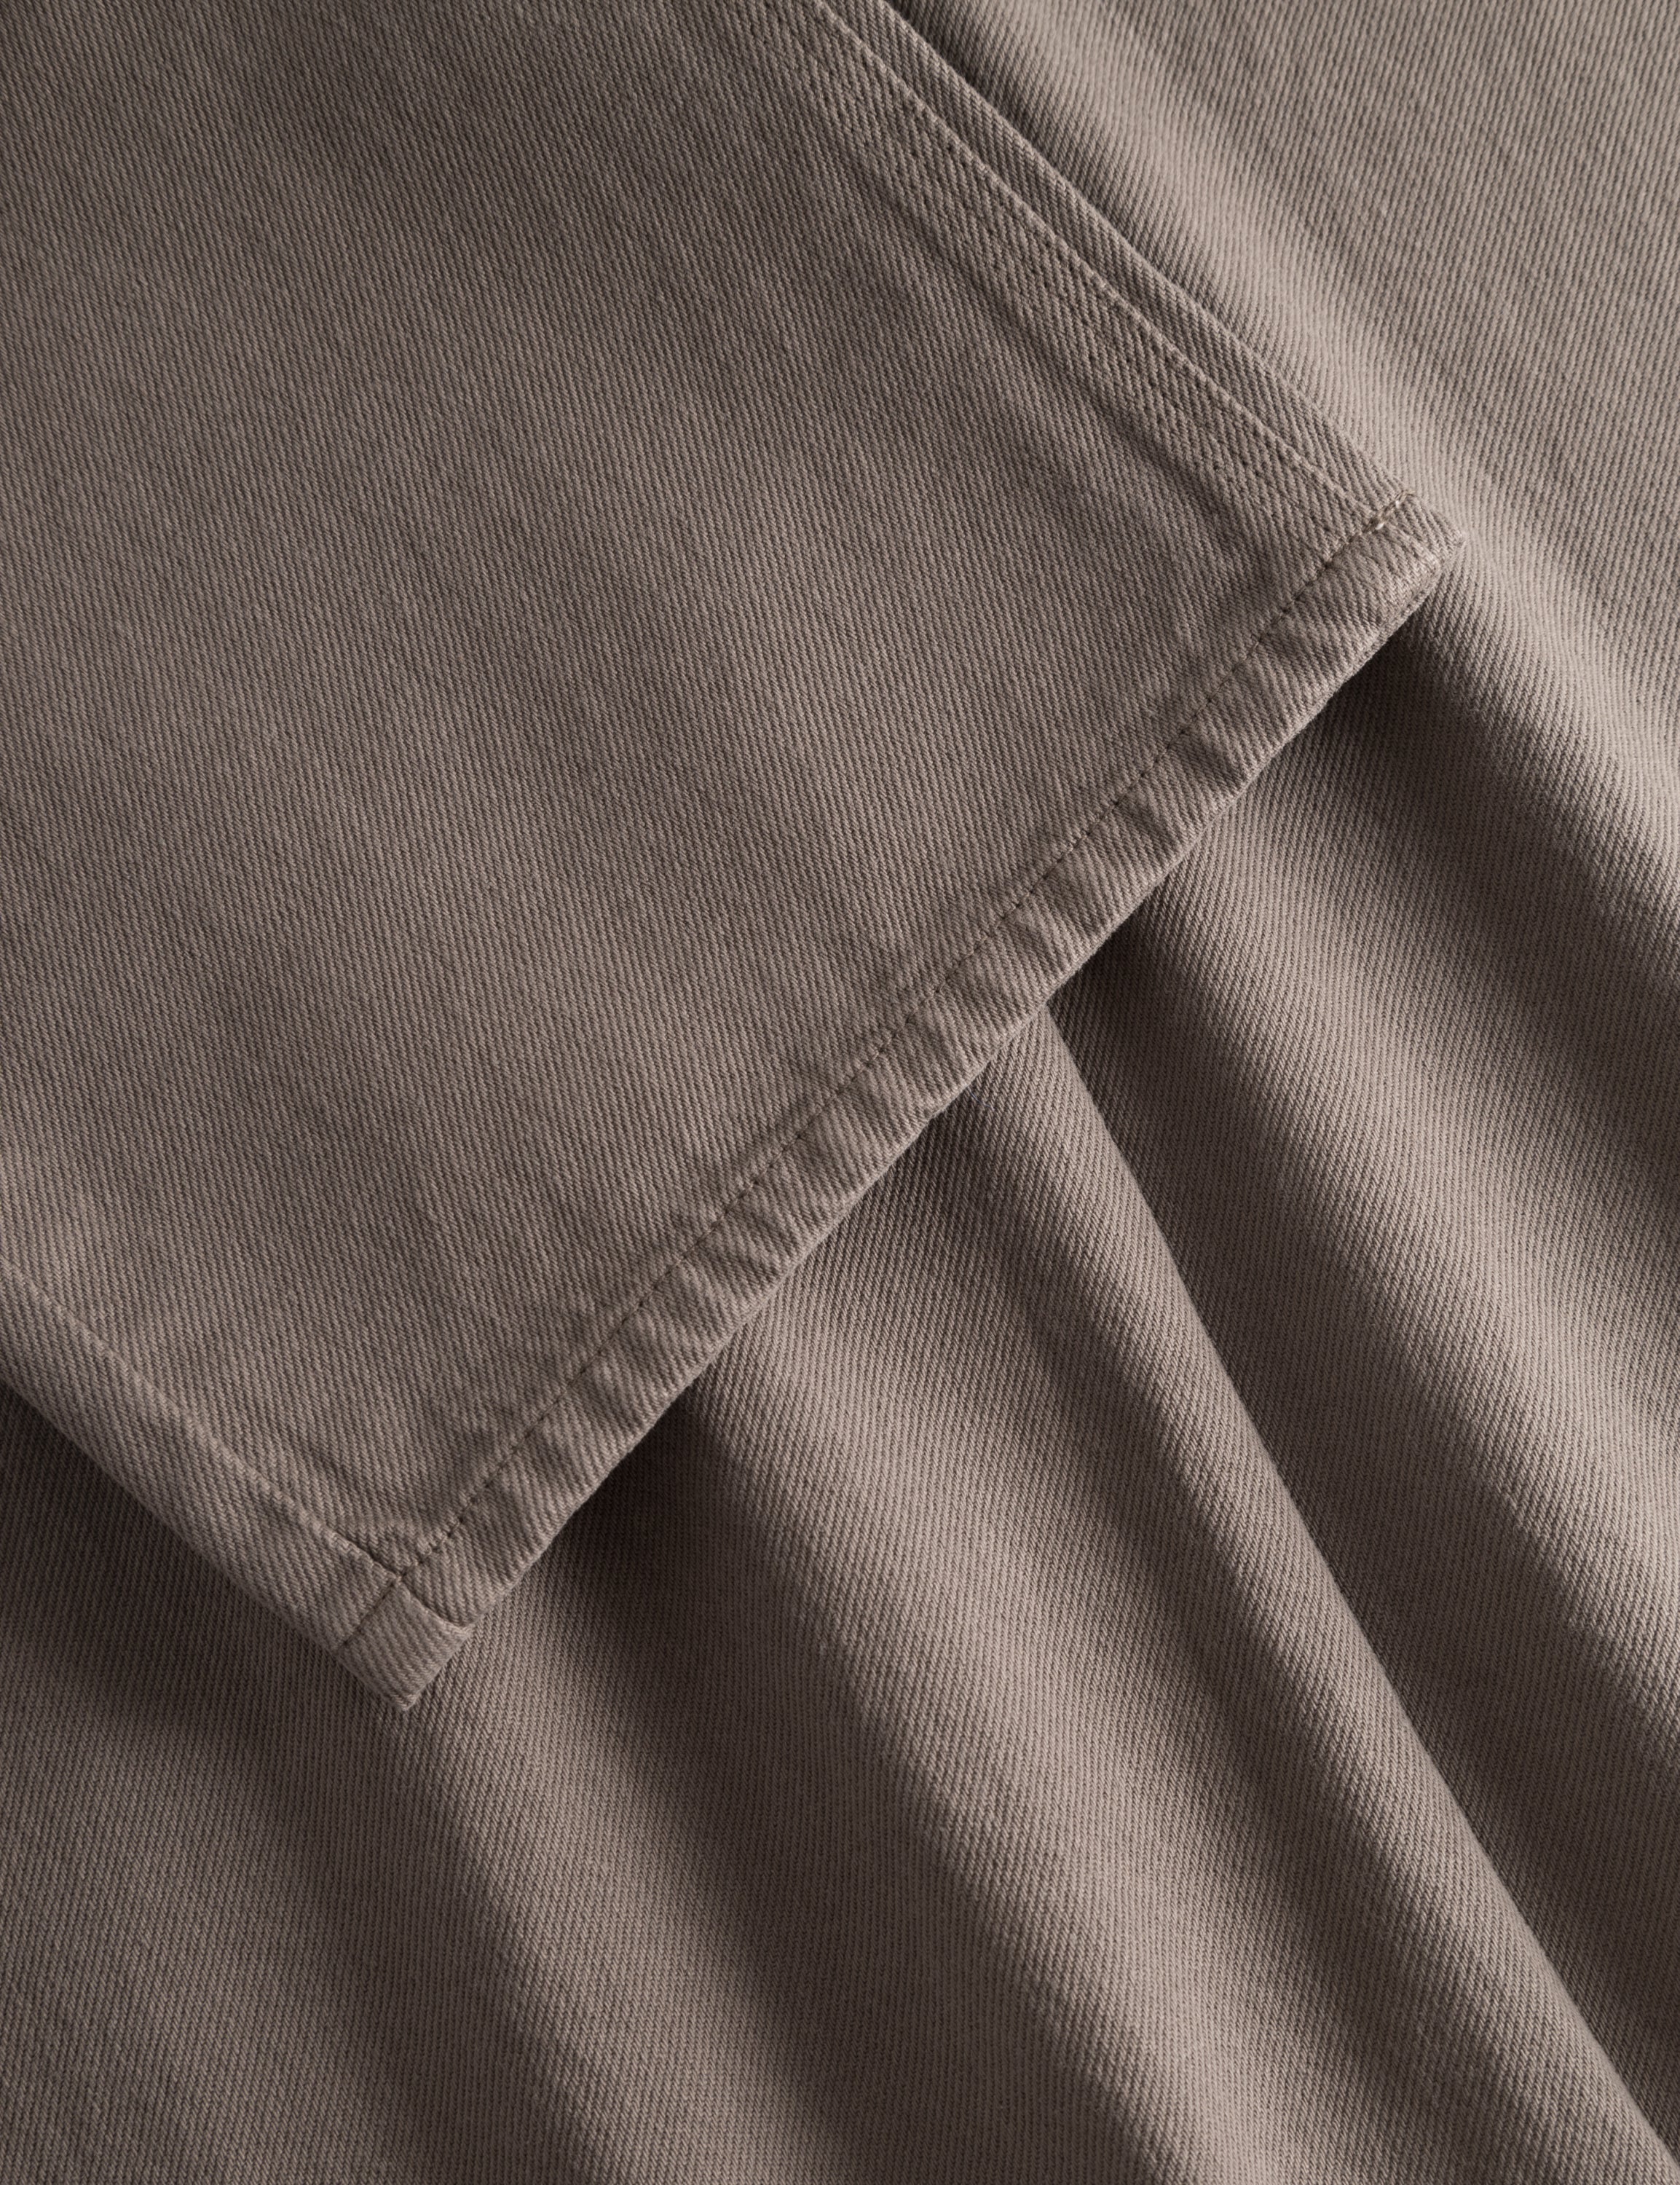 Foret Clay Pants - Stone twill